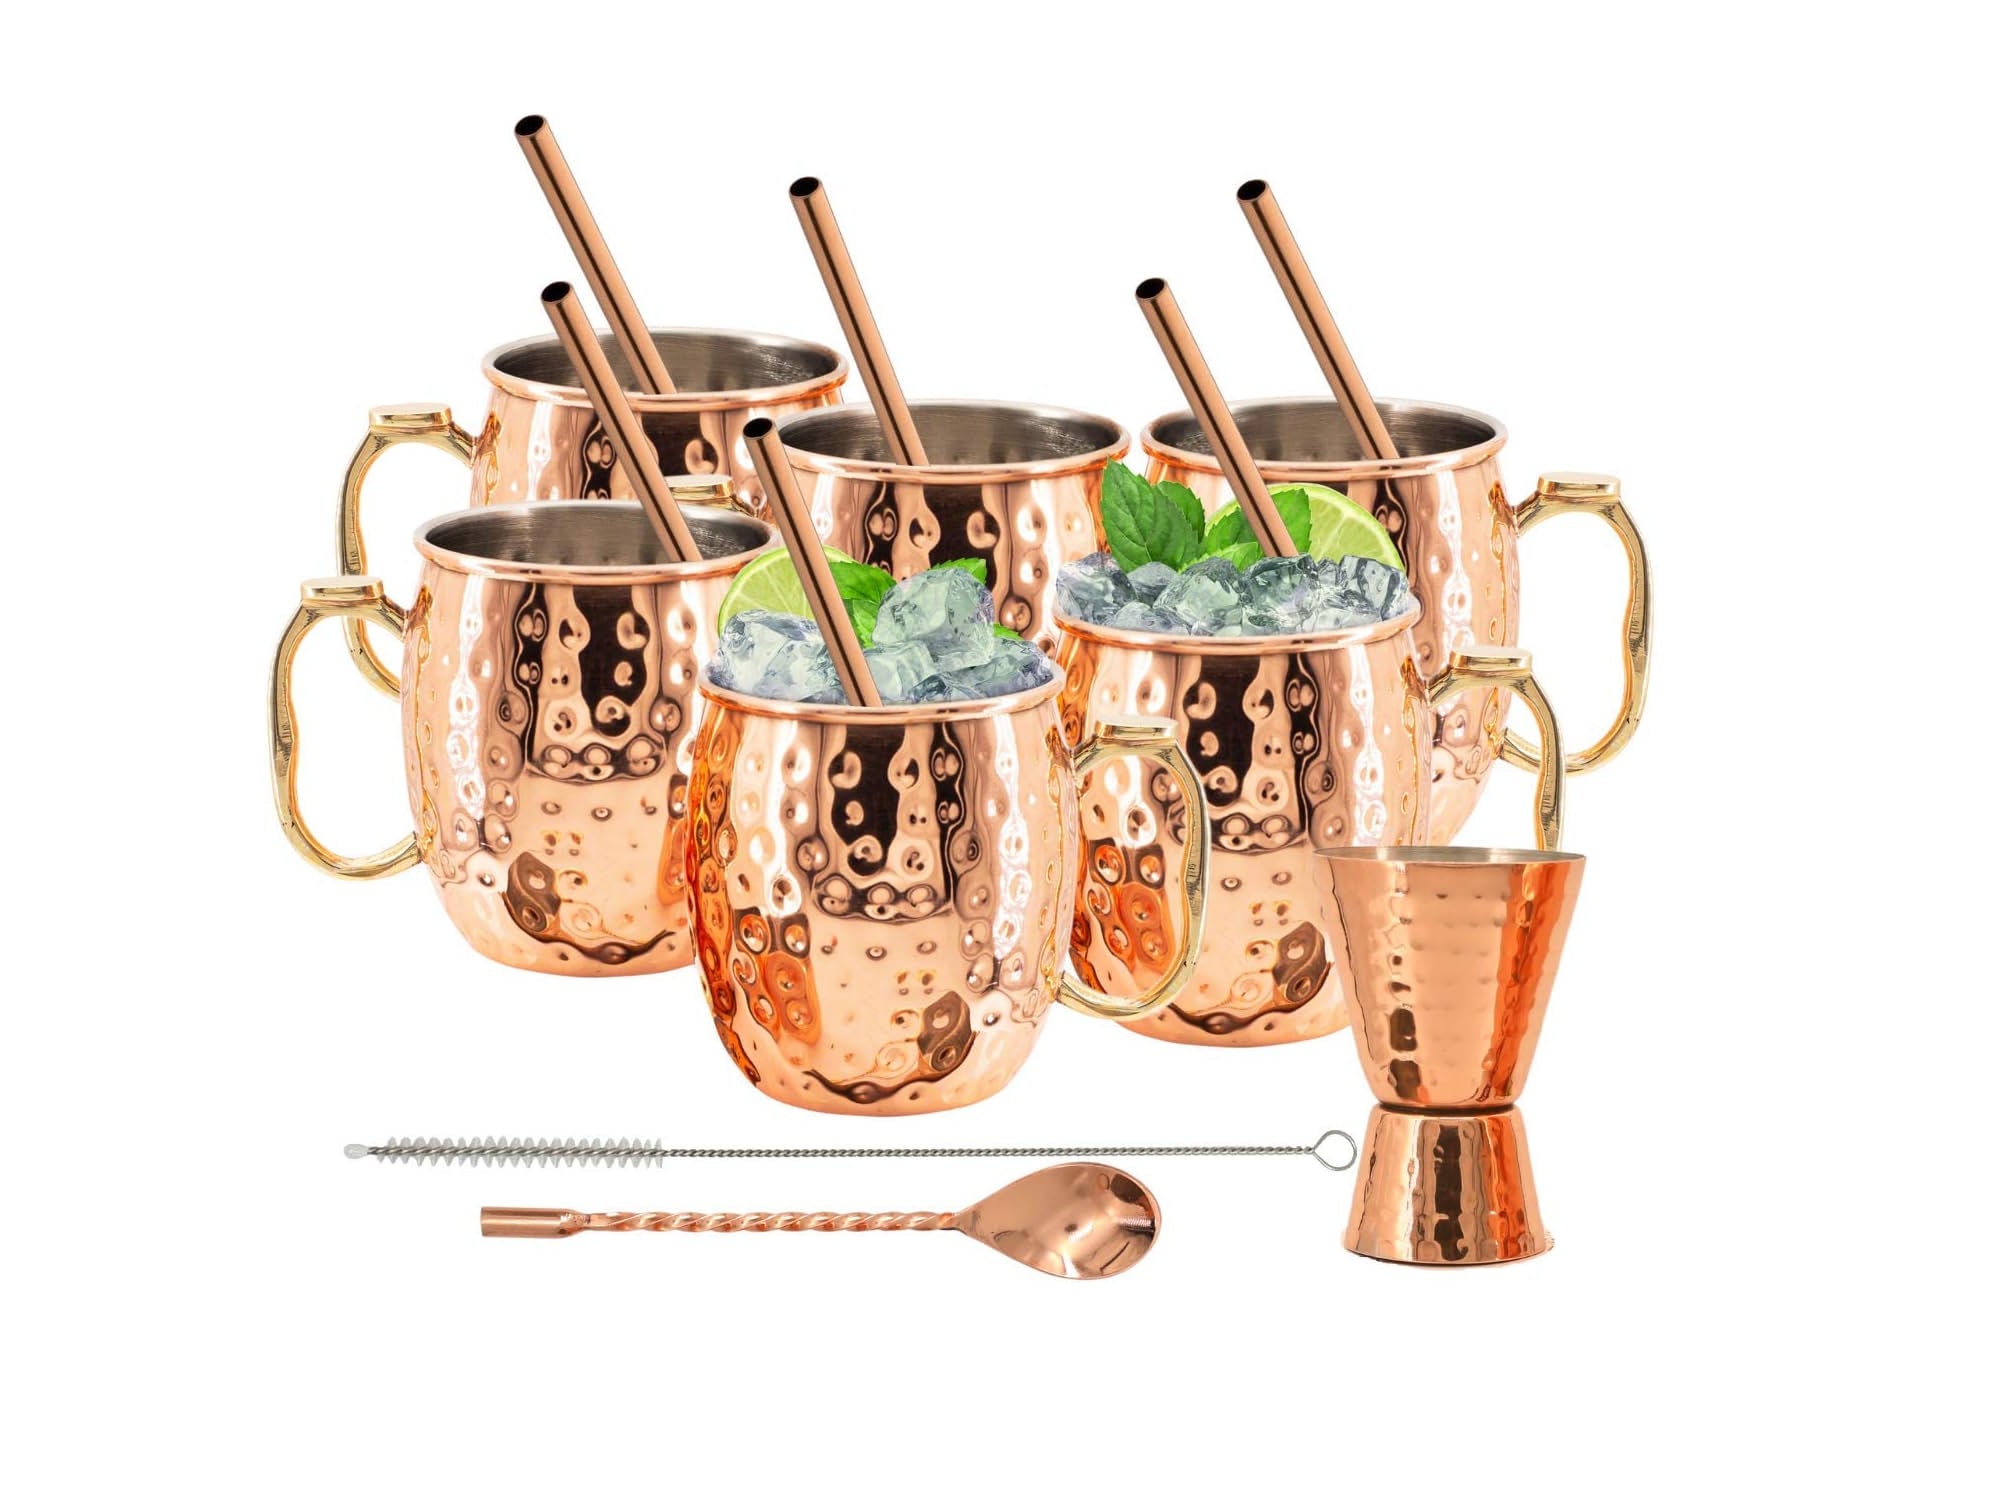 Bar Lux 1 oz / 2 oz Copper-Plated Stainless Steel Jigger - Japanese Style - 1 Count Box